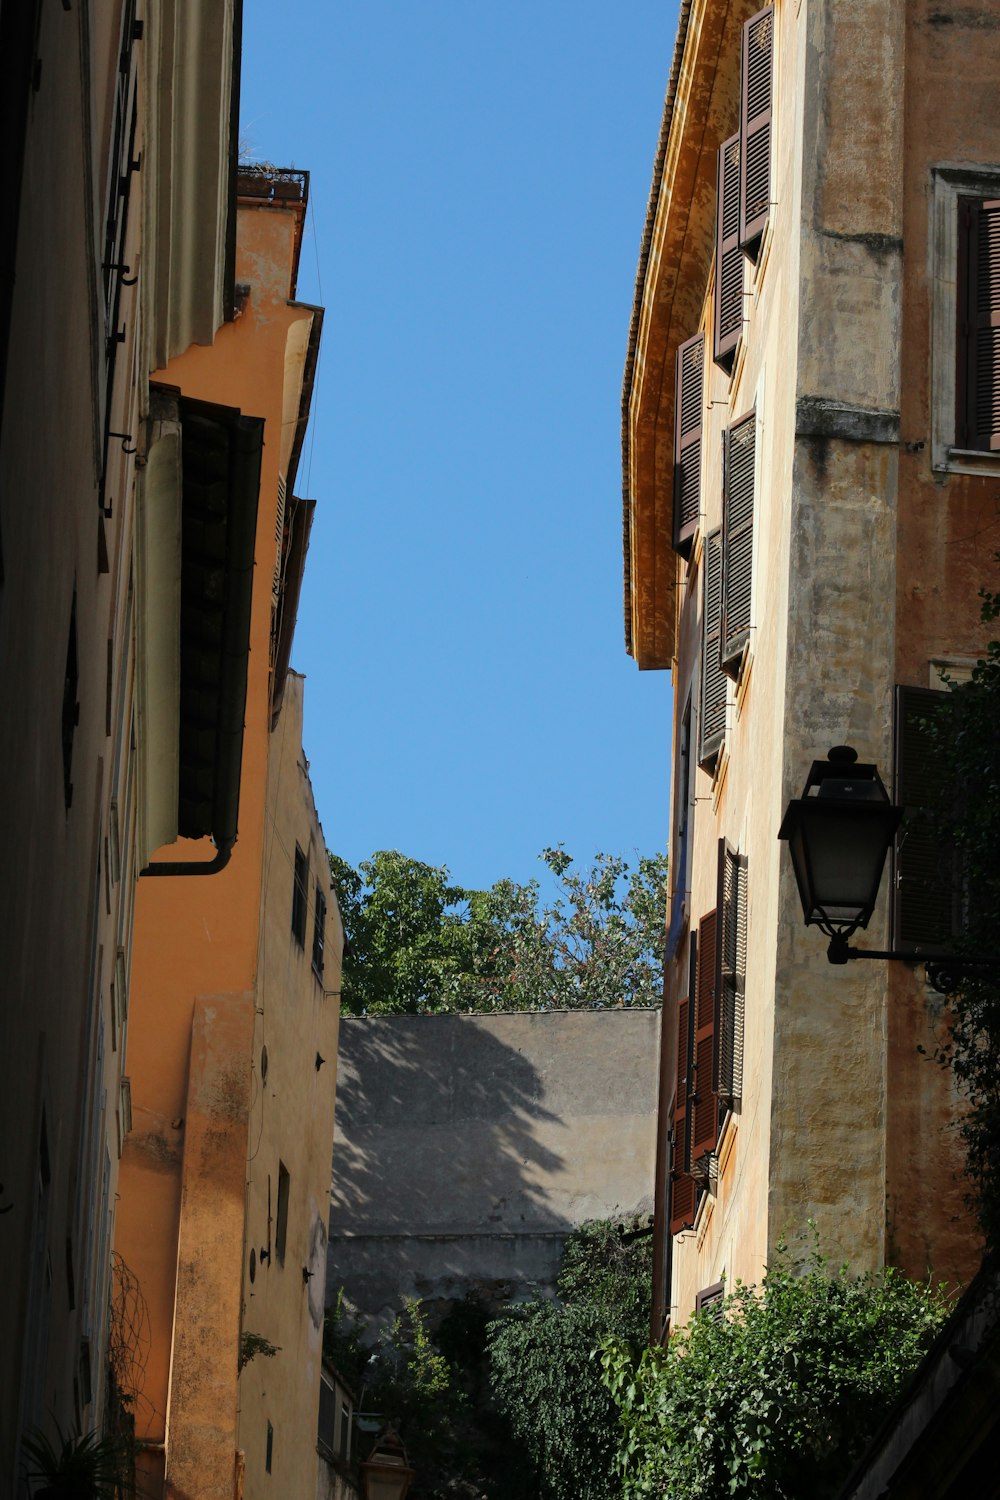 a view of a building from a narrow alley way